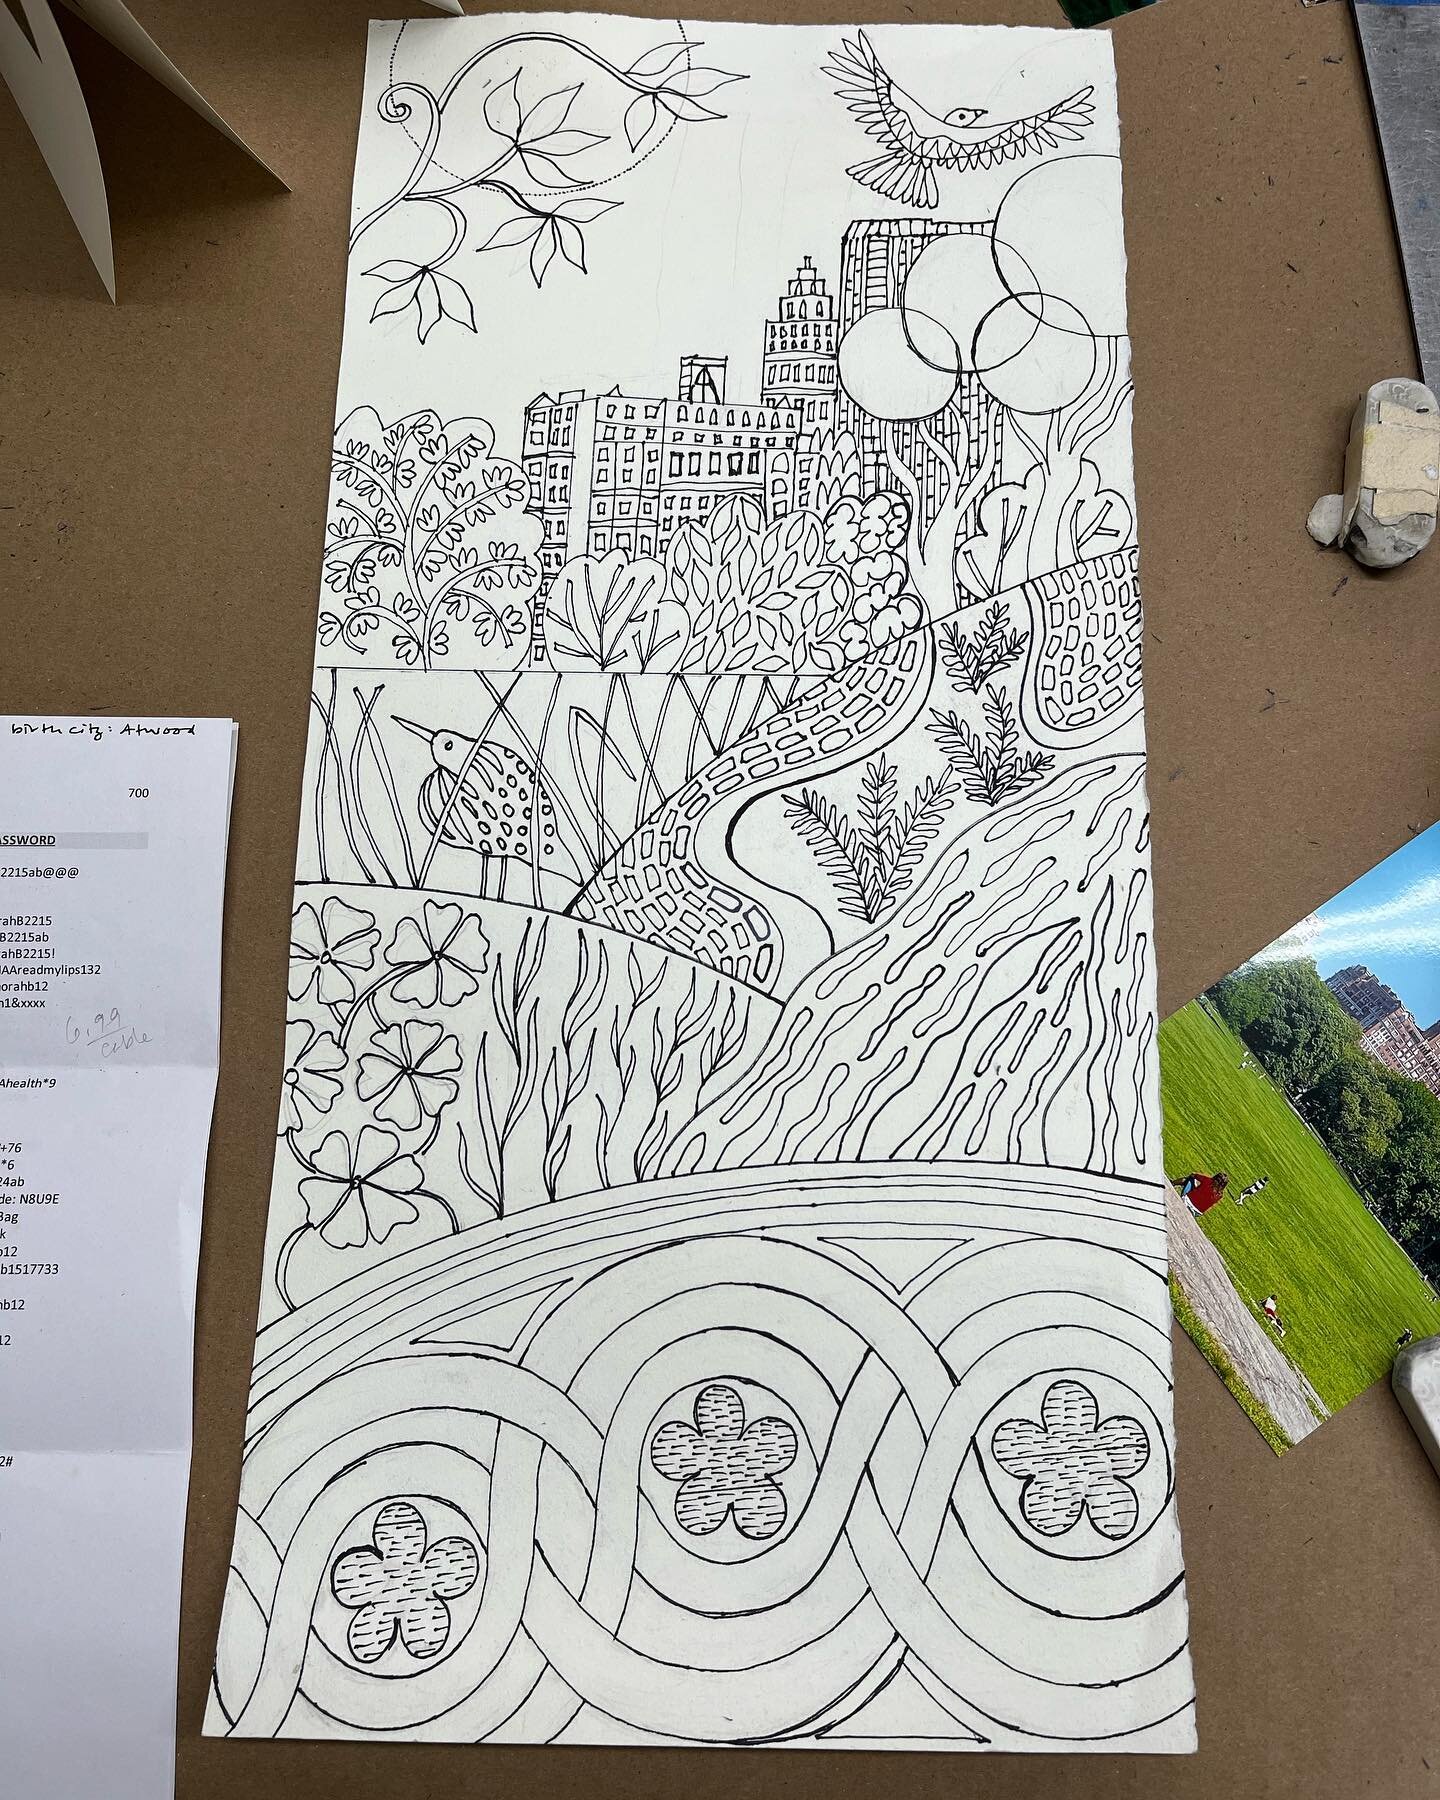 Drawing of Central Park for upcoming commission.